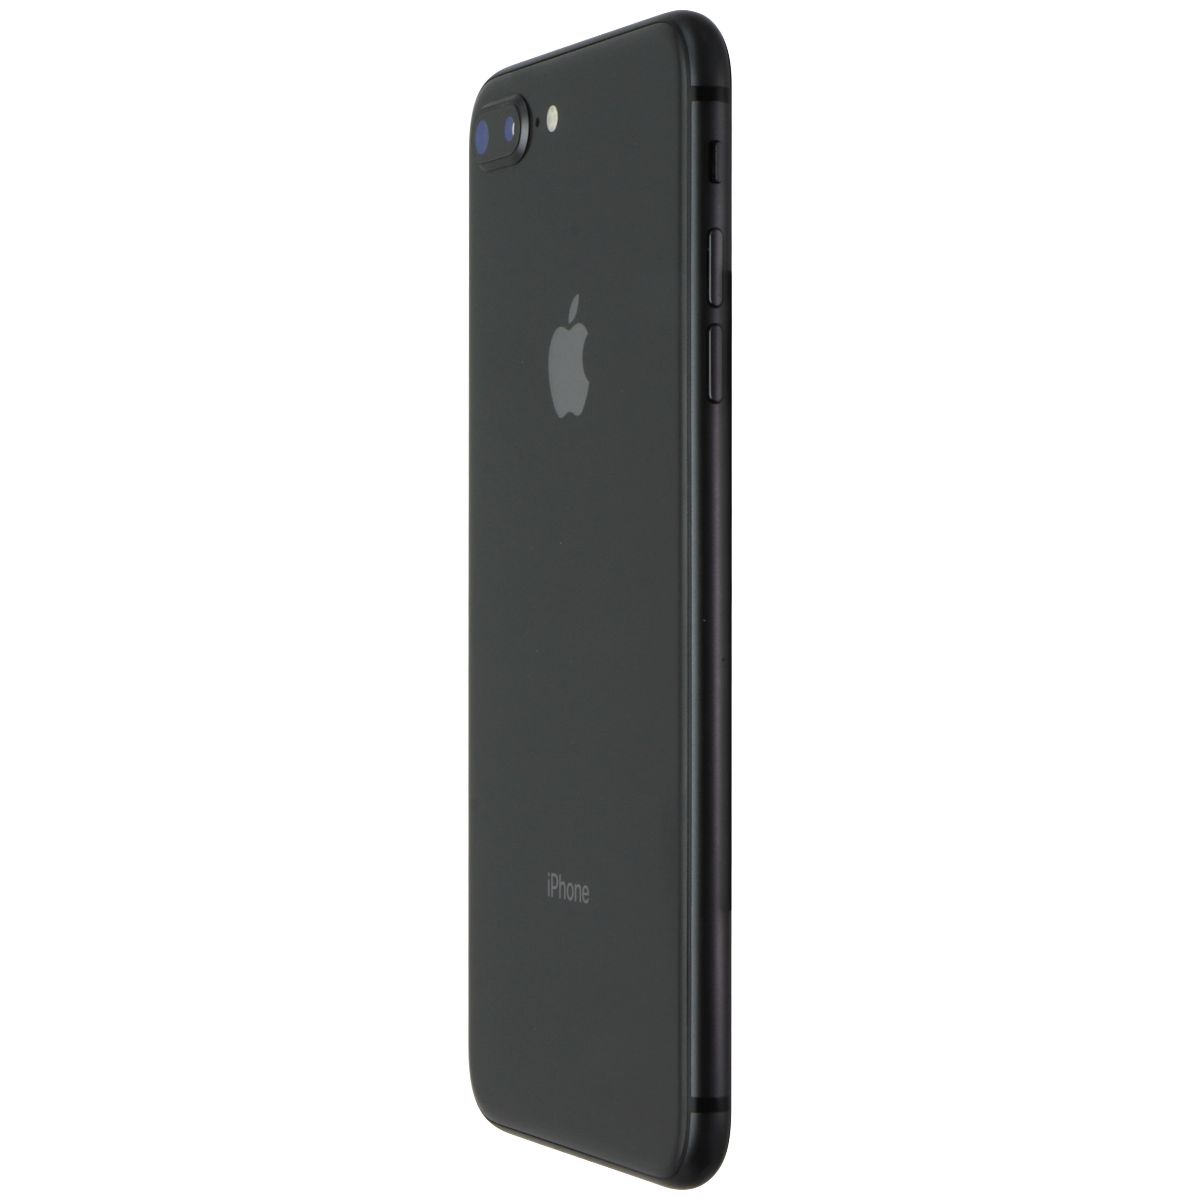 Apple iPhone 8 Plus (A1864) Unlocked - 64GB/Gray - Defective/Home Button Issue Cell Phones & Smartphones Apple    - Simple Cell Bulk Wholesale Pricing - USA Seller